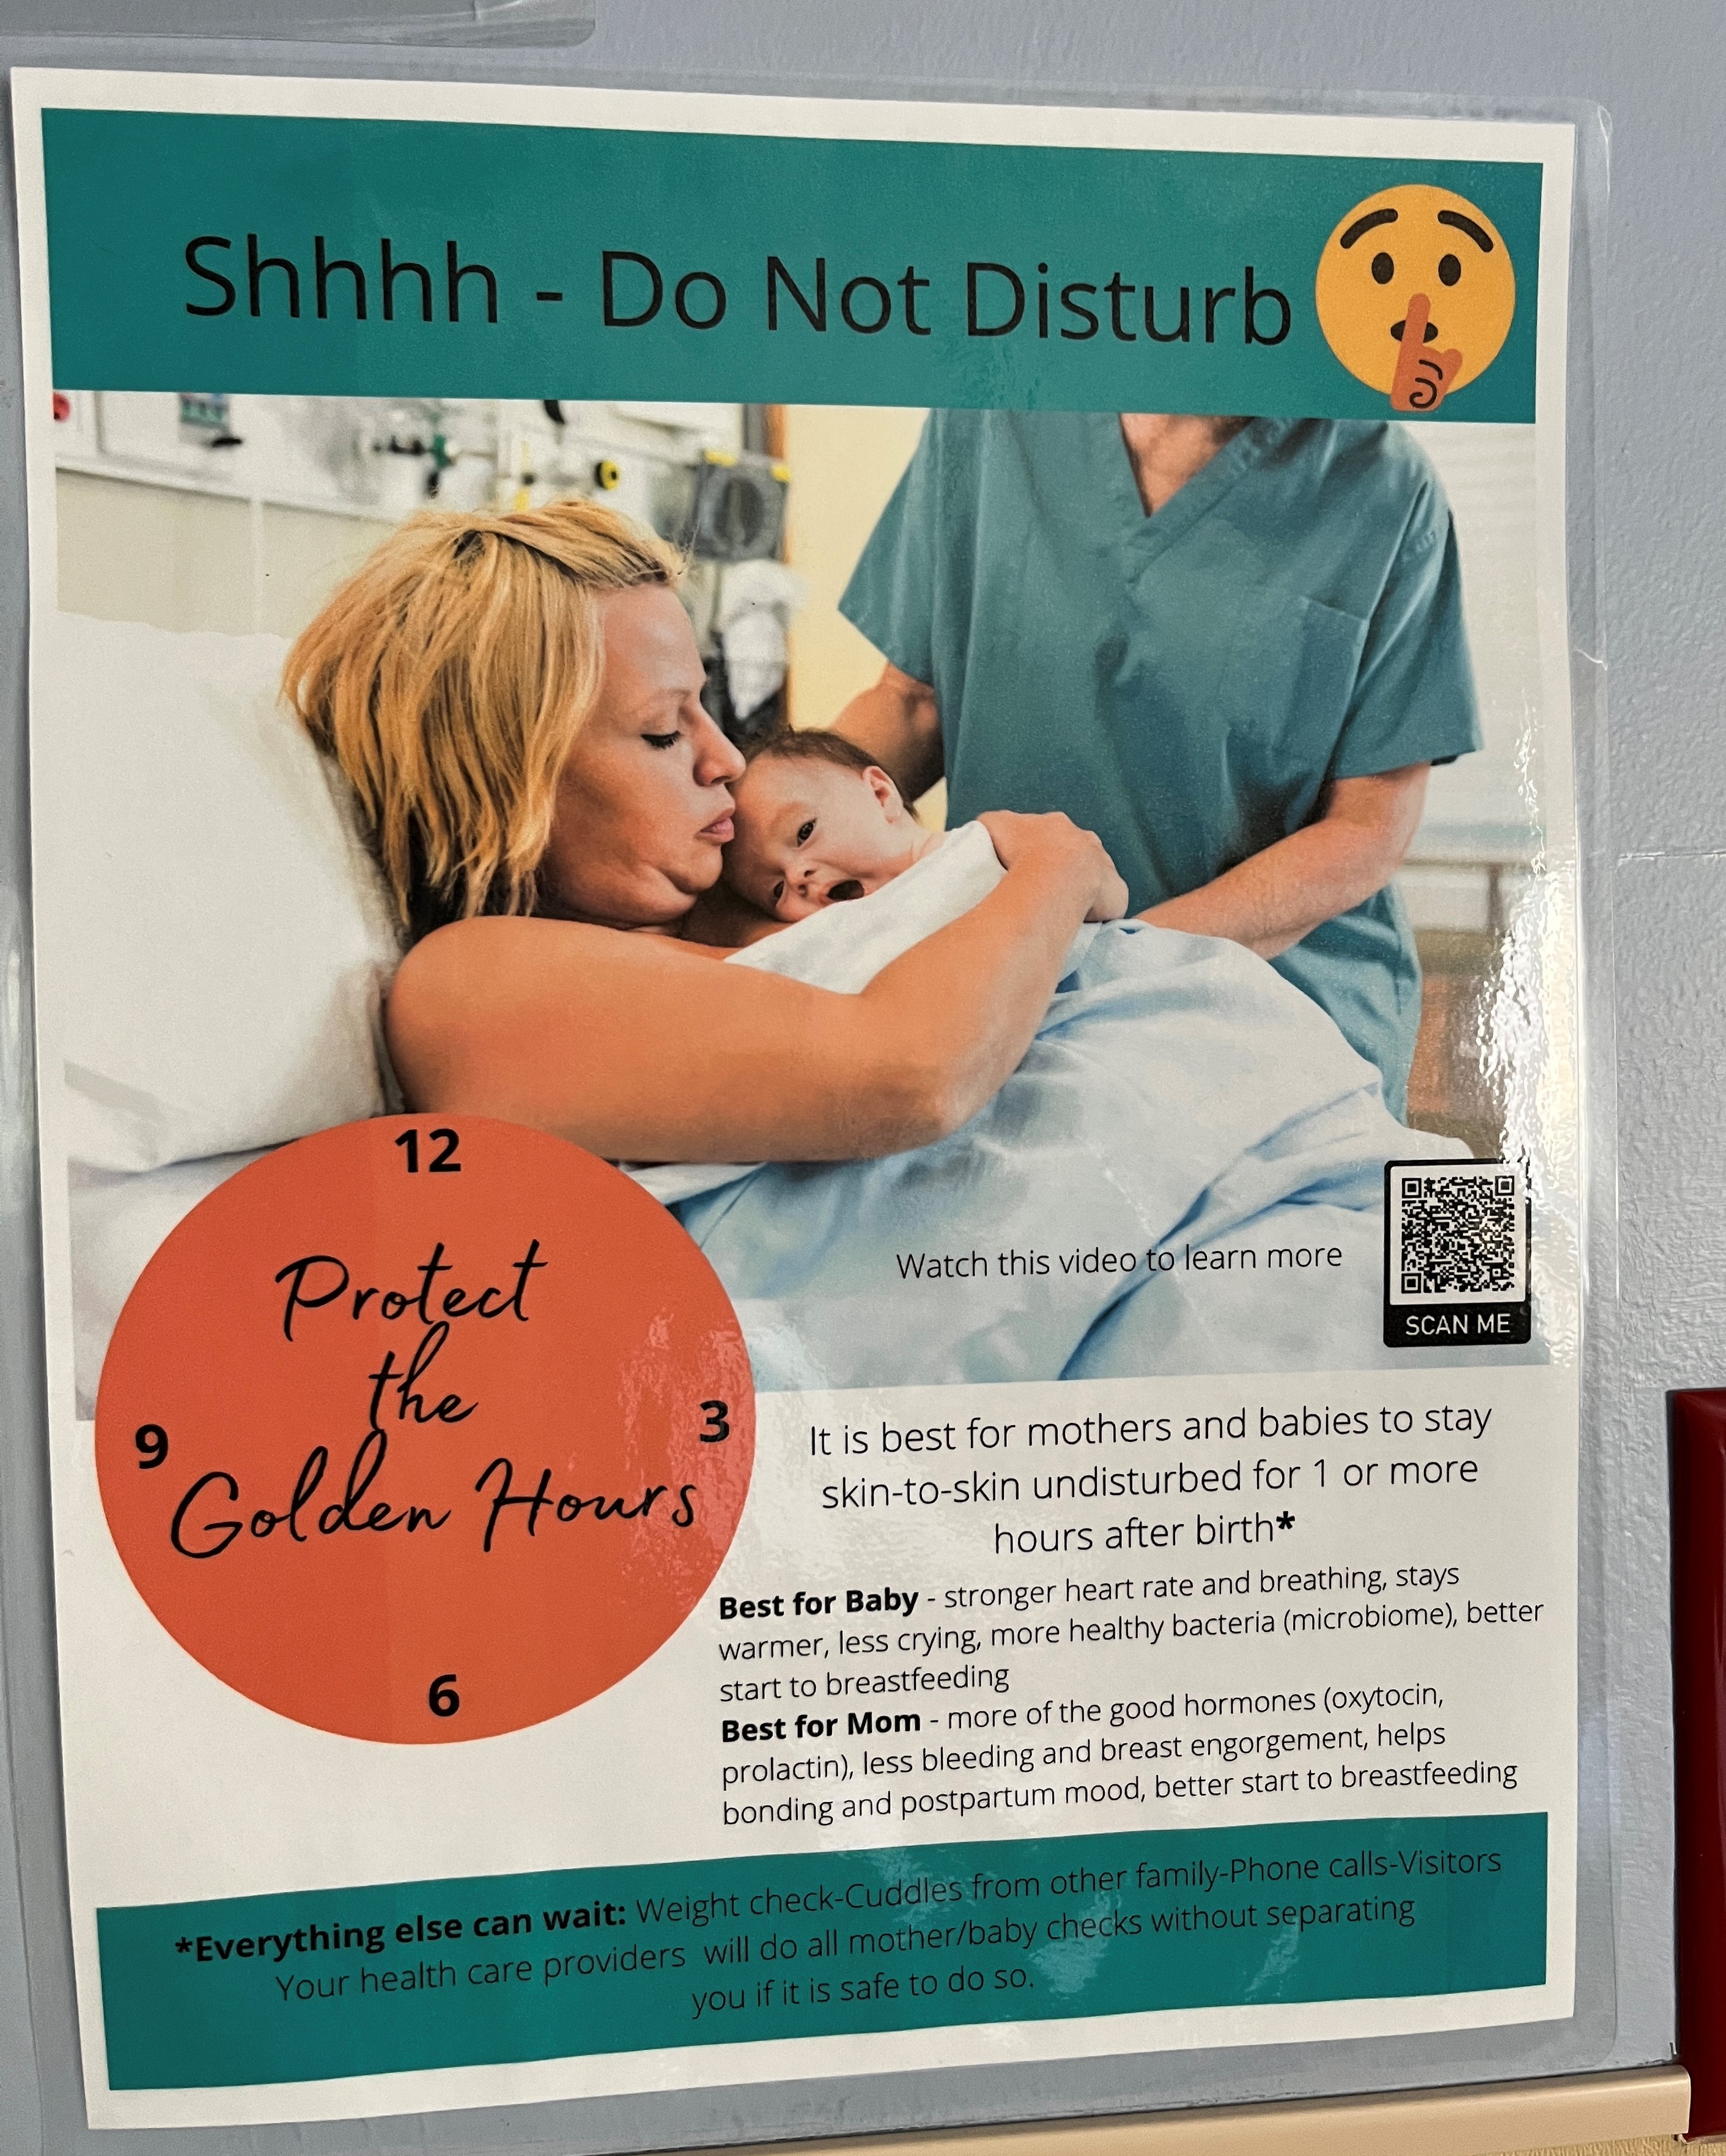 A poster on a wall that promotes undisturbed skin-to-skin contact for new mothers that says Shhhh – Do Not Disturb, protect the golden hours